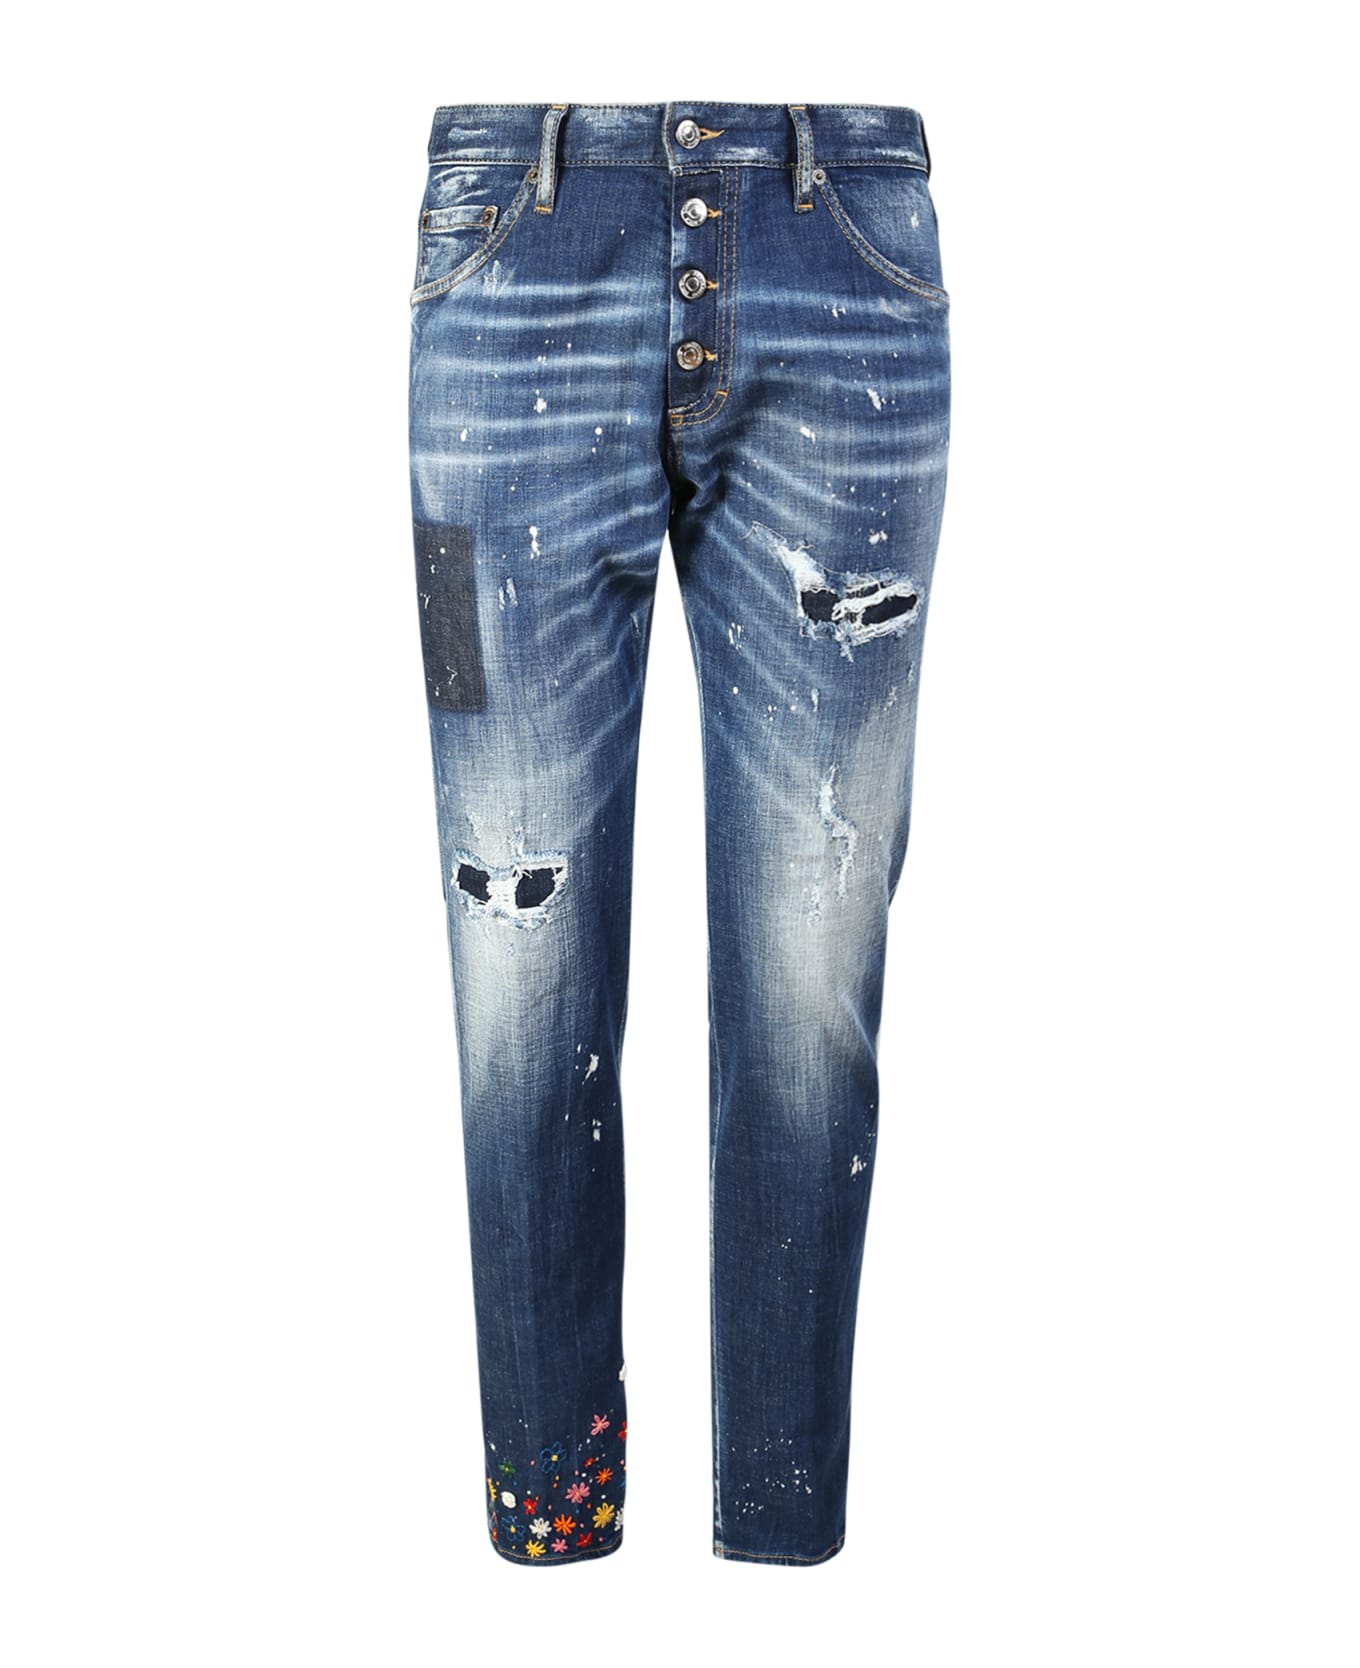 Dsquared2 Ditsy Jeans - Blue デニム